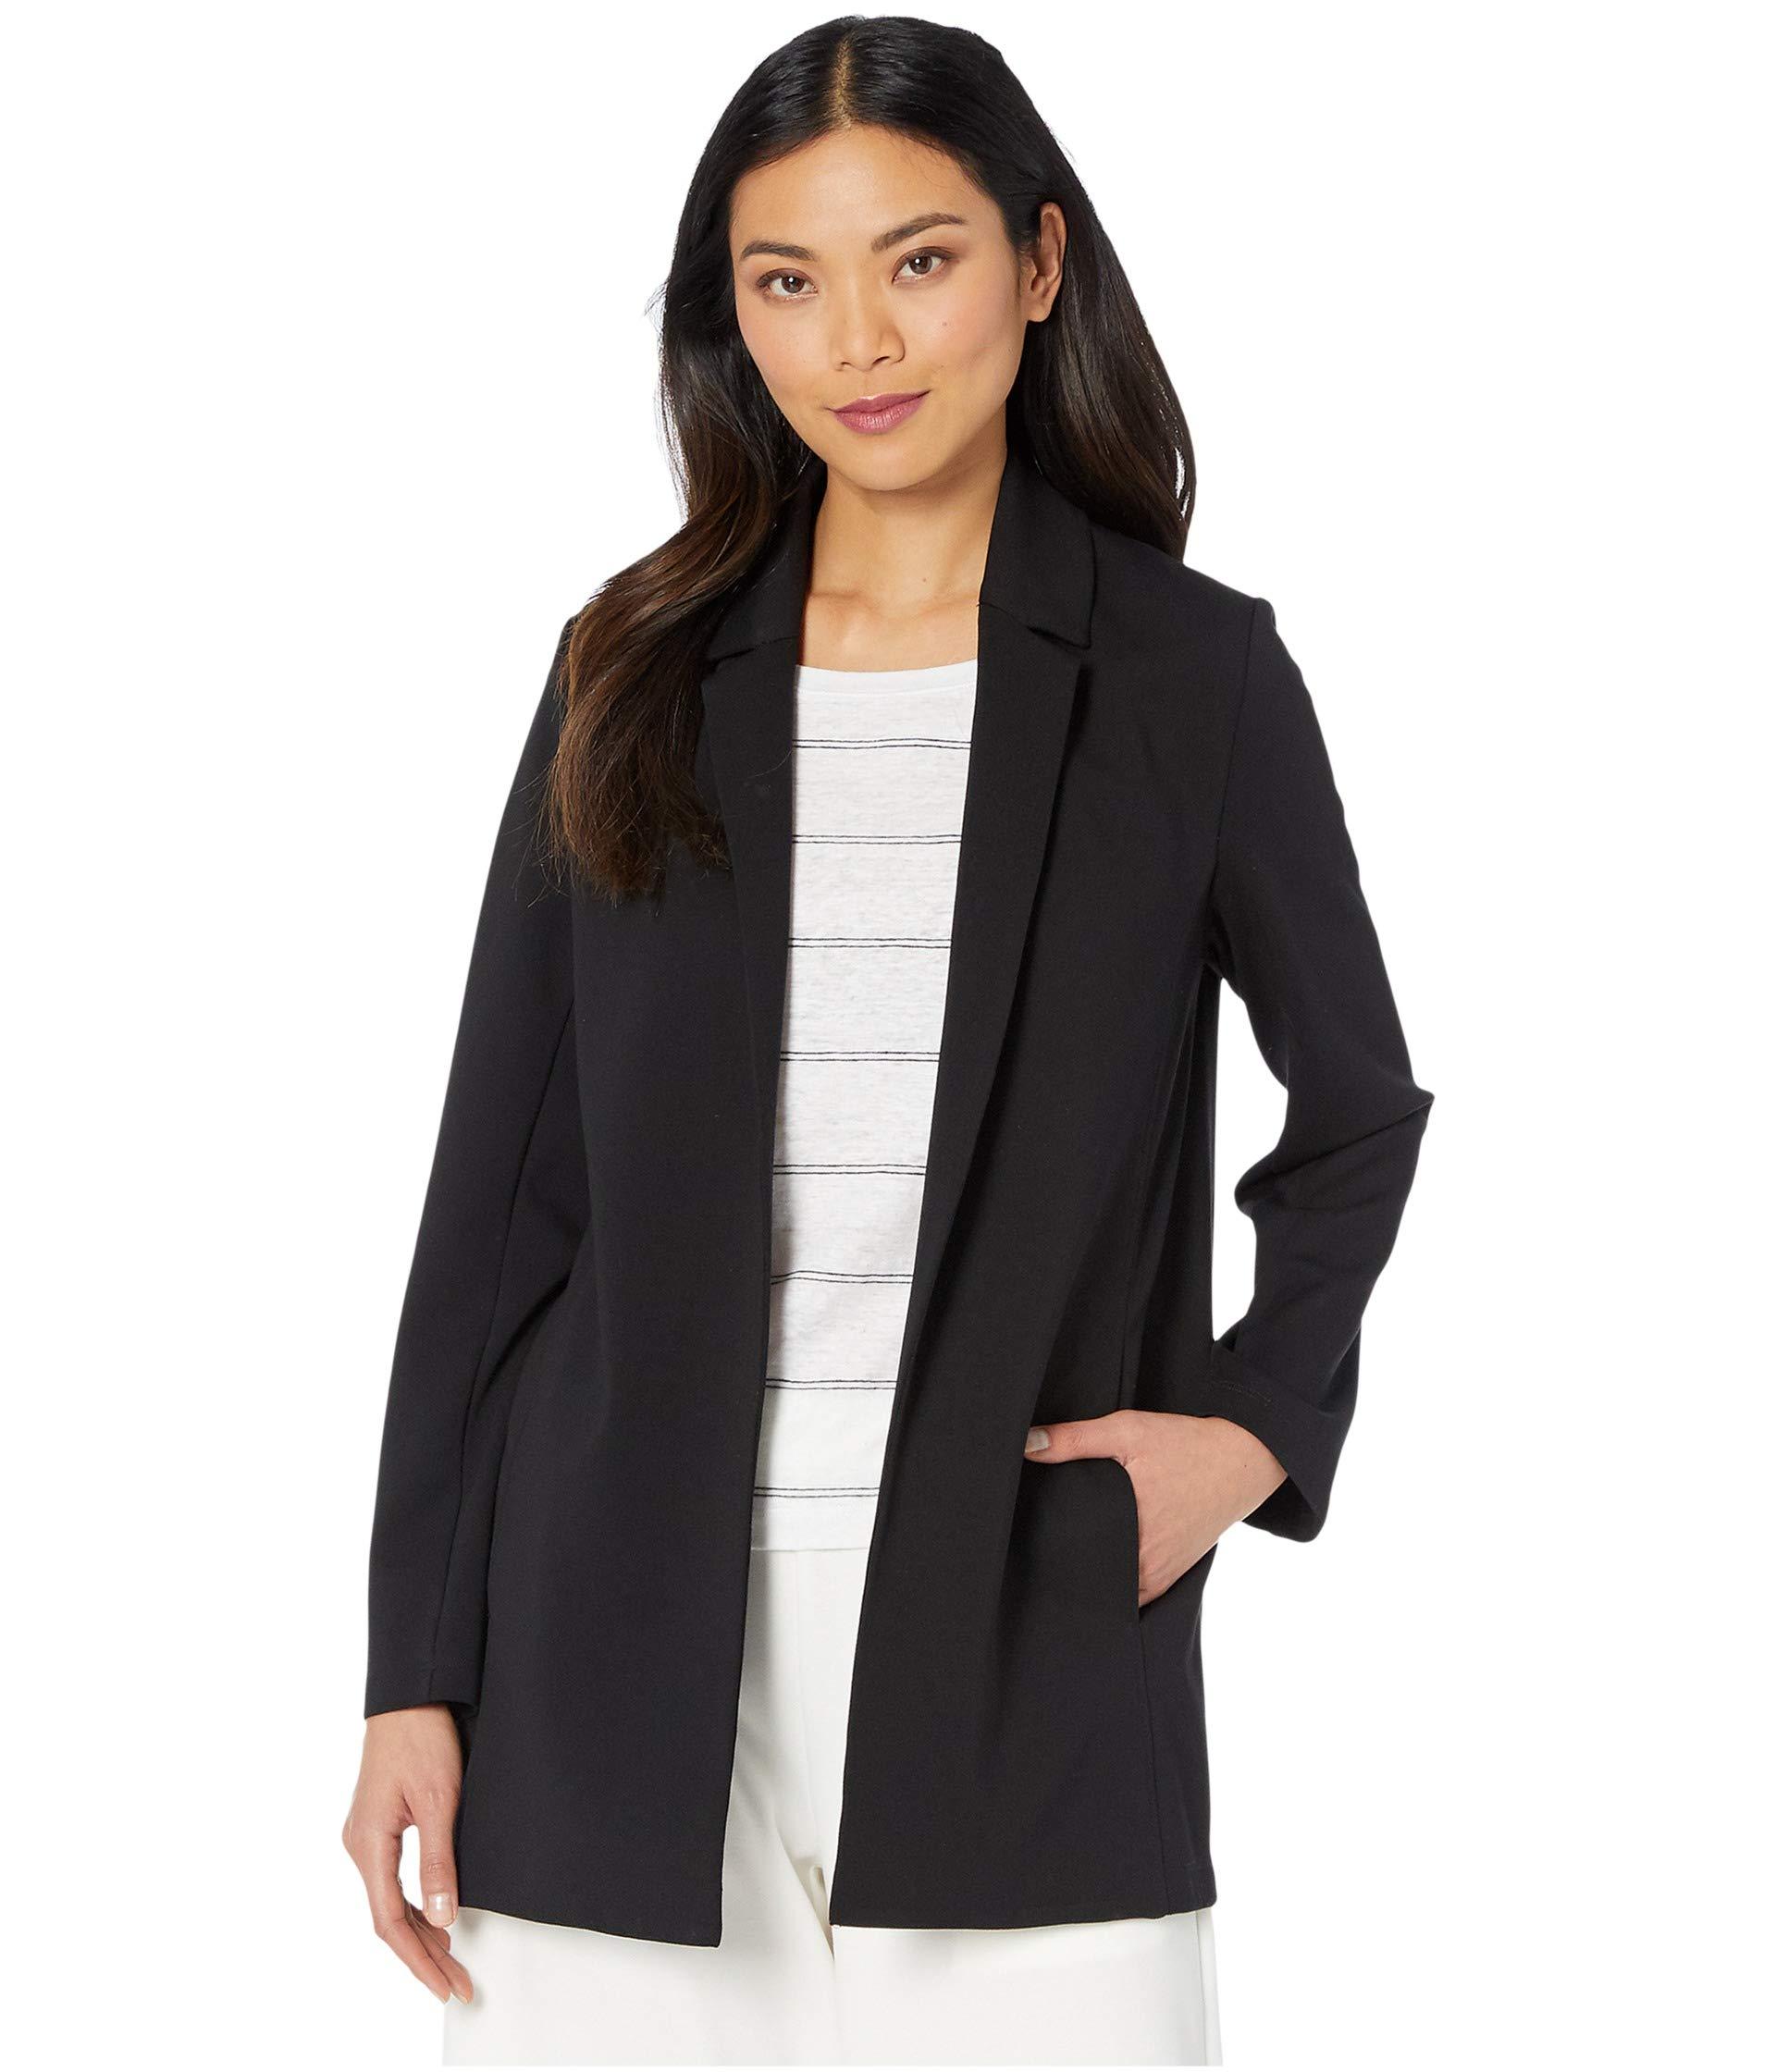 Eileen Fisher Synthetic Notch Collar Jacket in Black - Lyst